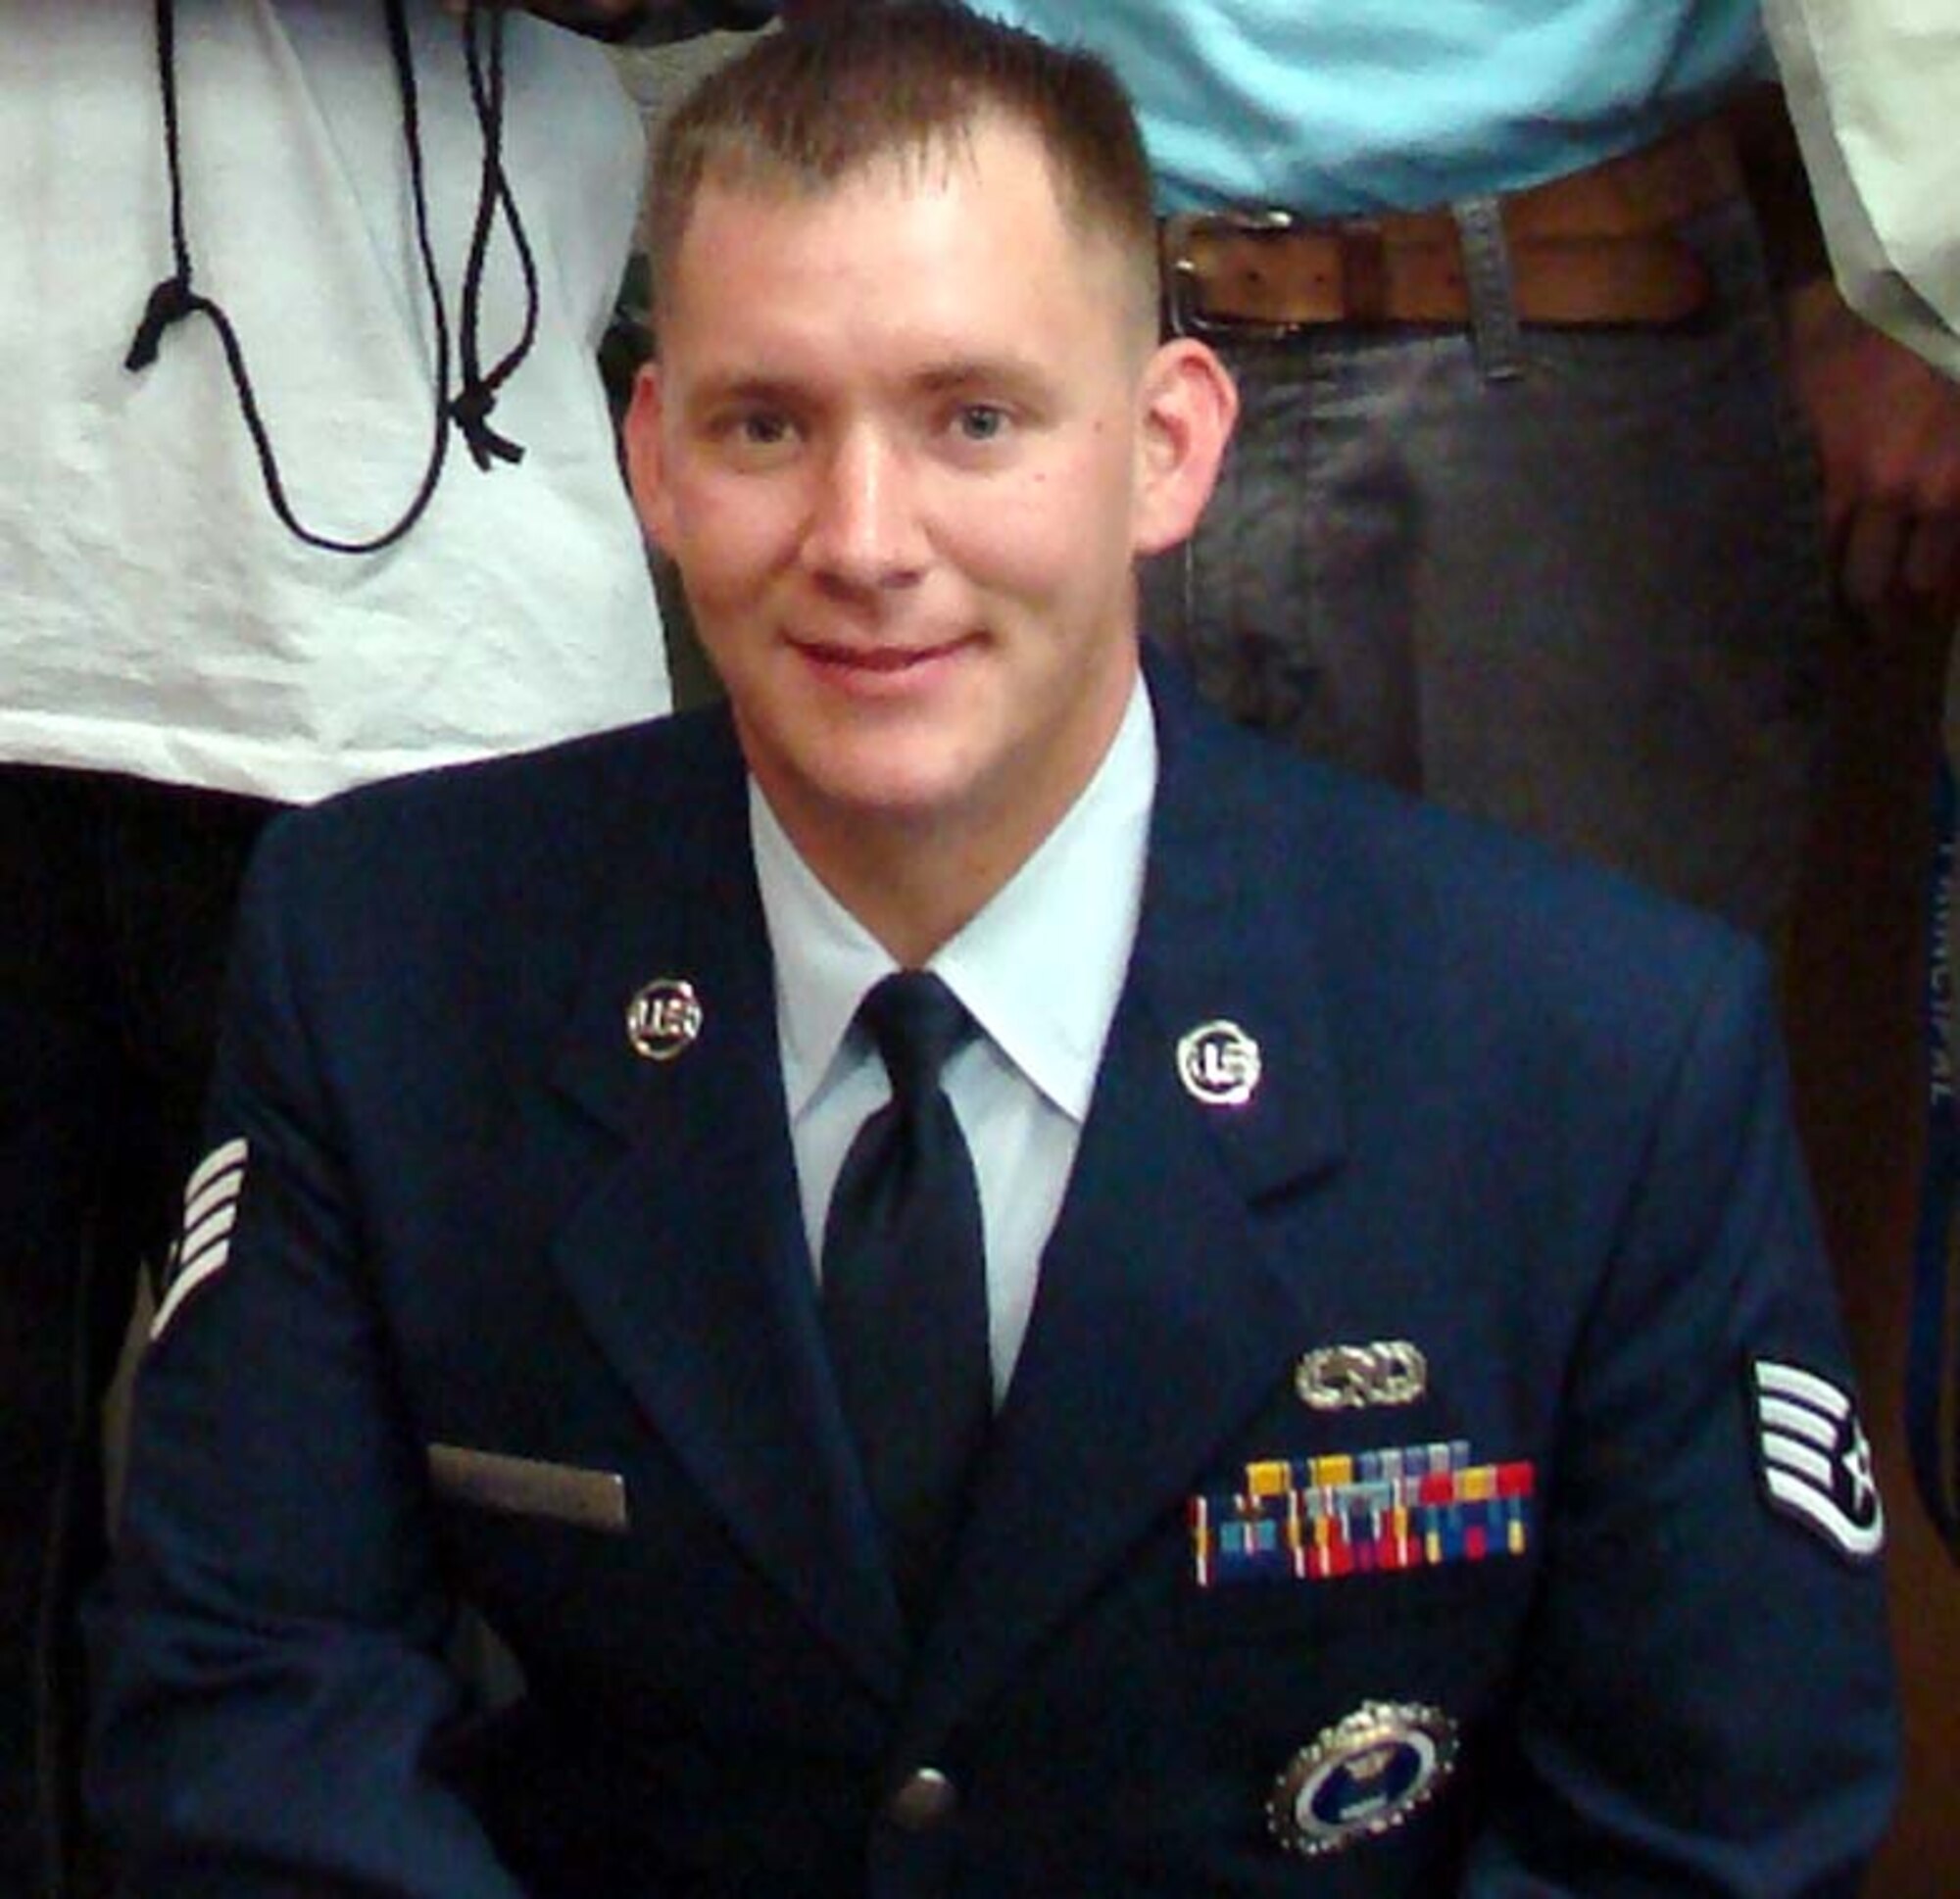 Air Force recruiter, Staff Sgt. Bill Arguelles, donated bone marrow in May 2008, to a 67-year-old male suffering from leukemia. Sergeant Arguelles was selected as a donor match four years after he voluntarily signed up with the National Marrow Donor Program. (U.S. Air Force photo)